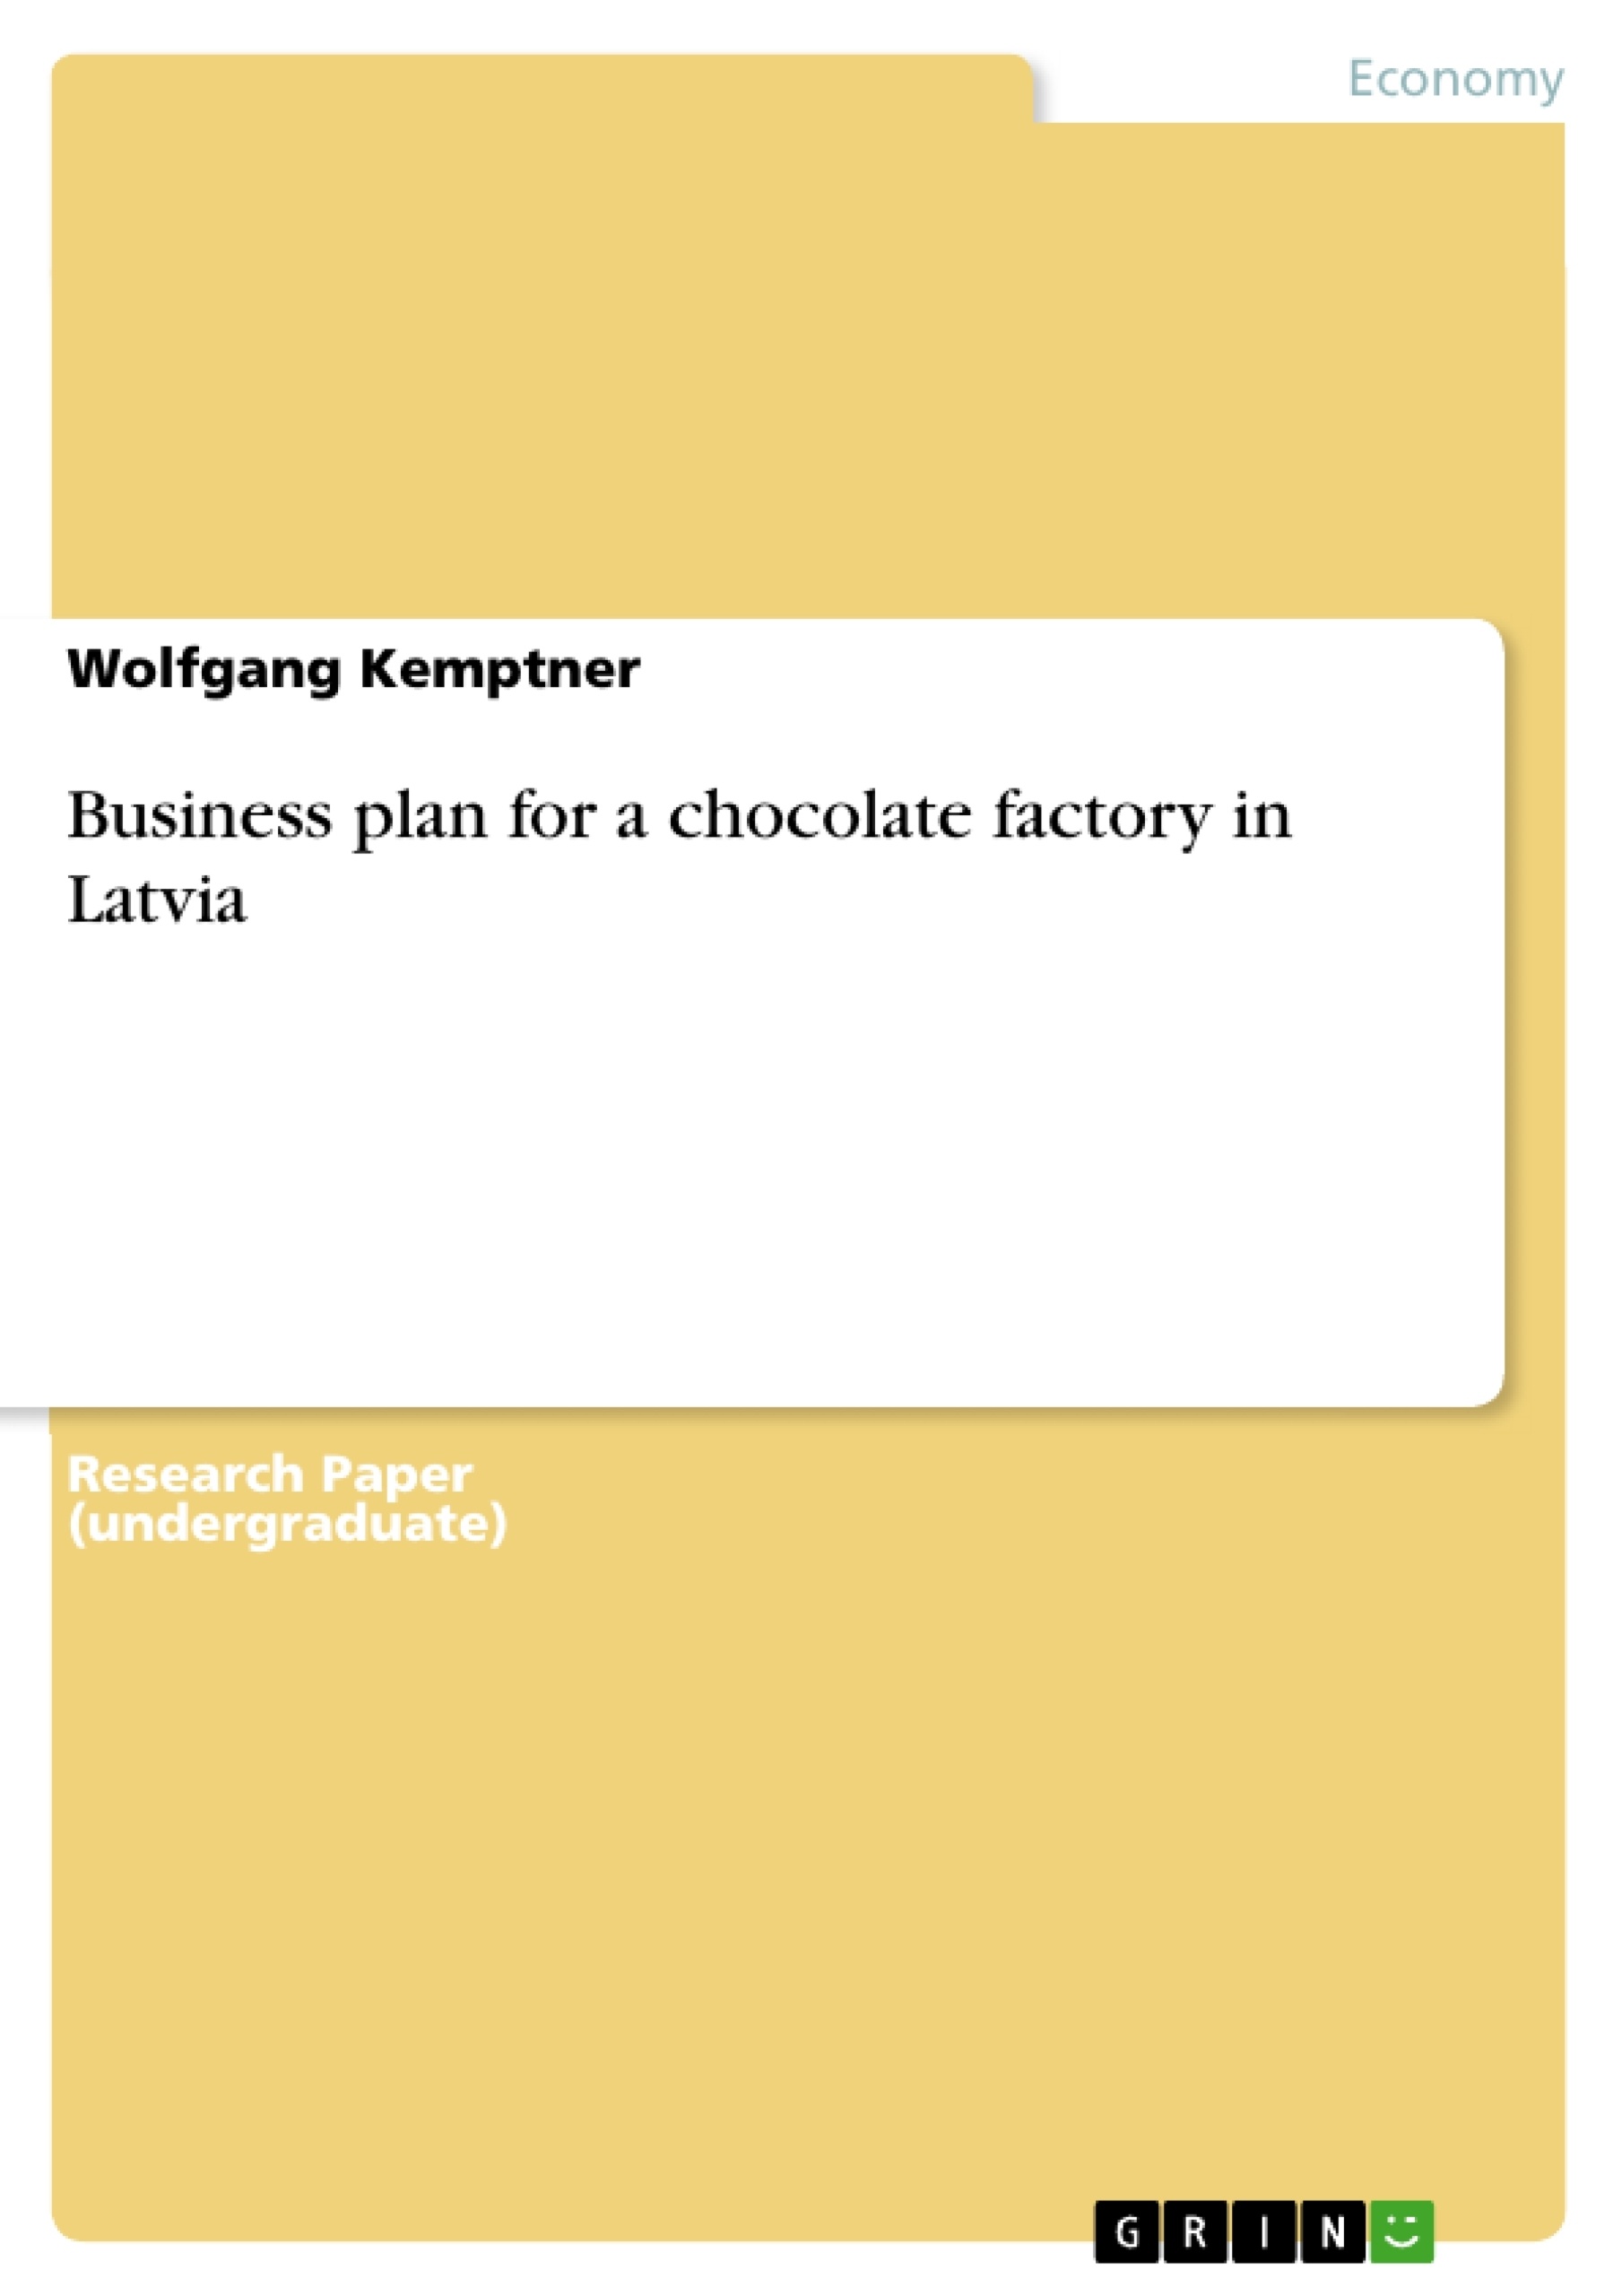 Title: Business plan for a chocolate factory in Latvia